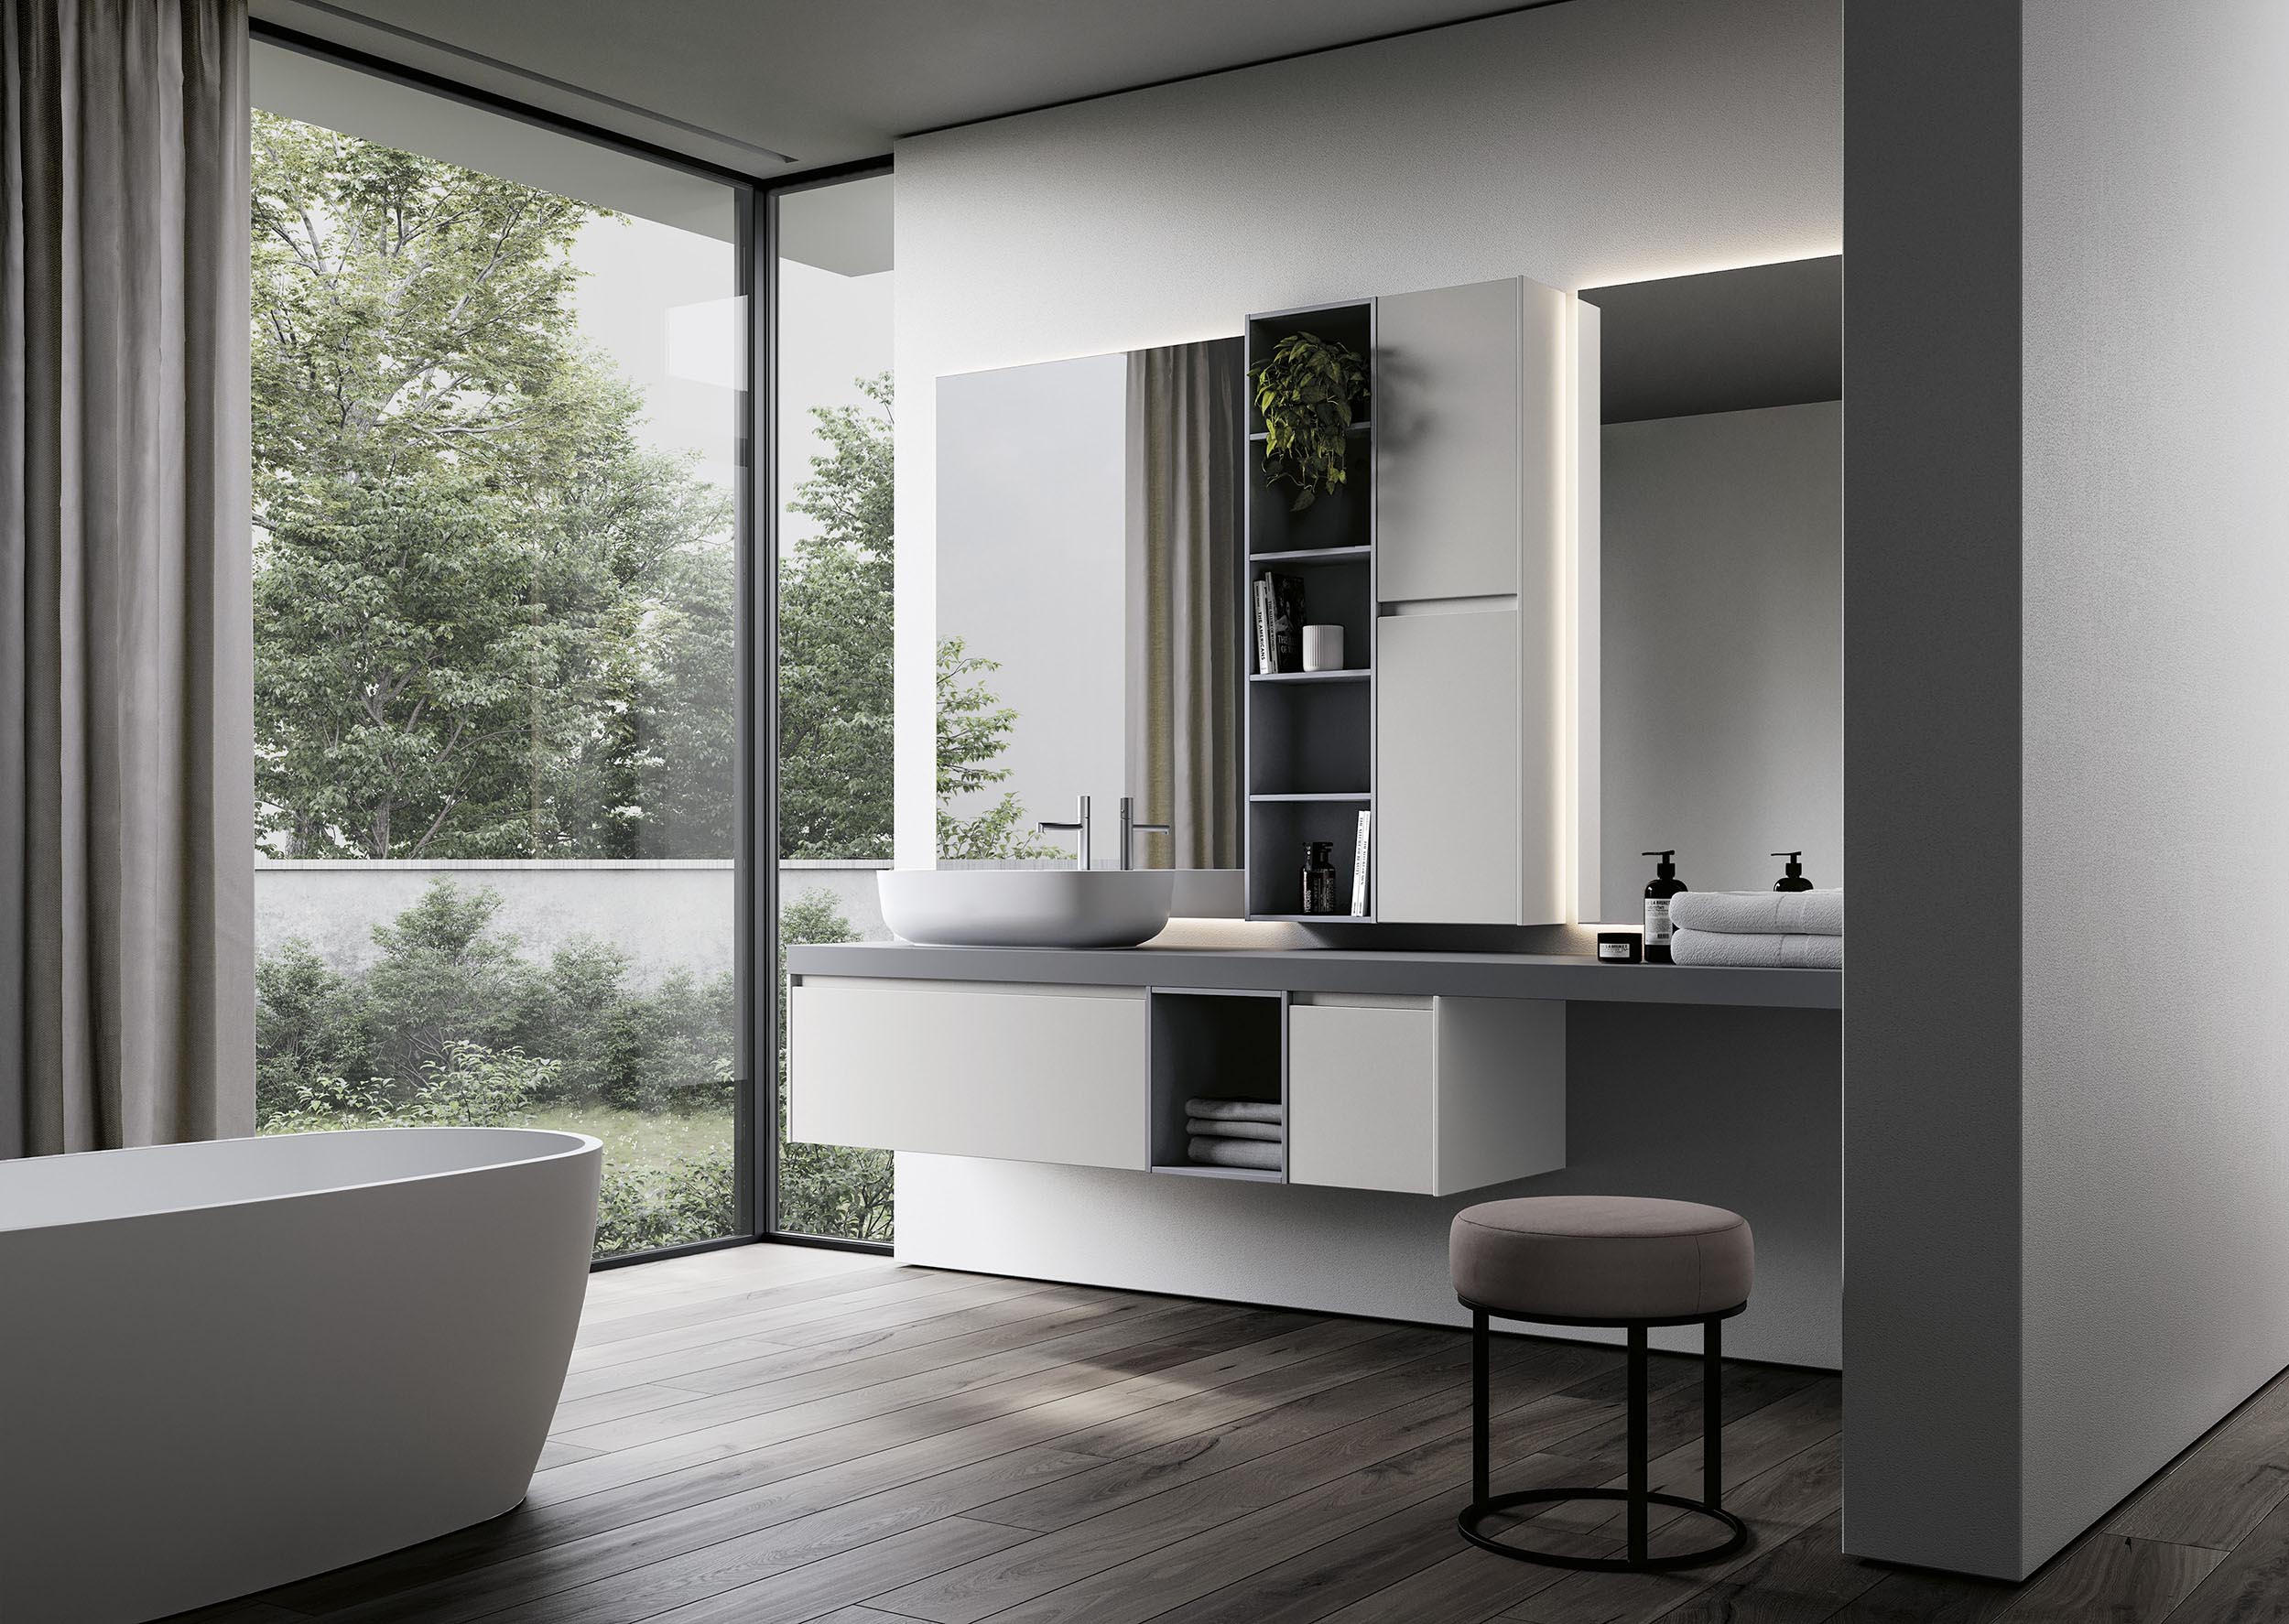 Enjoy modern bath cabinetry like this collection from Ideagroup